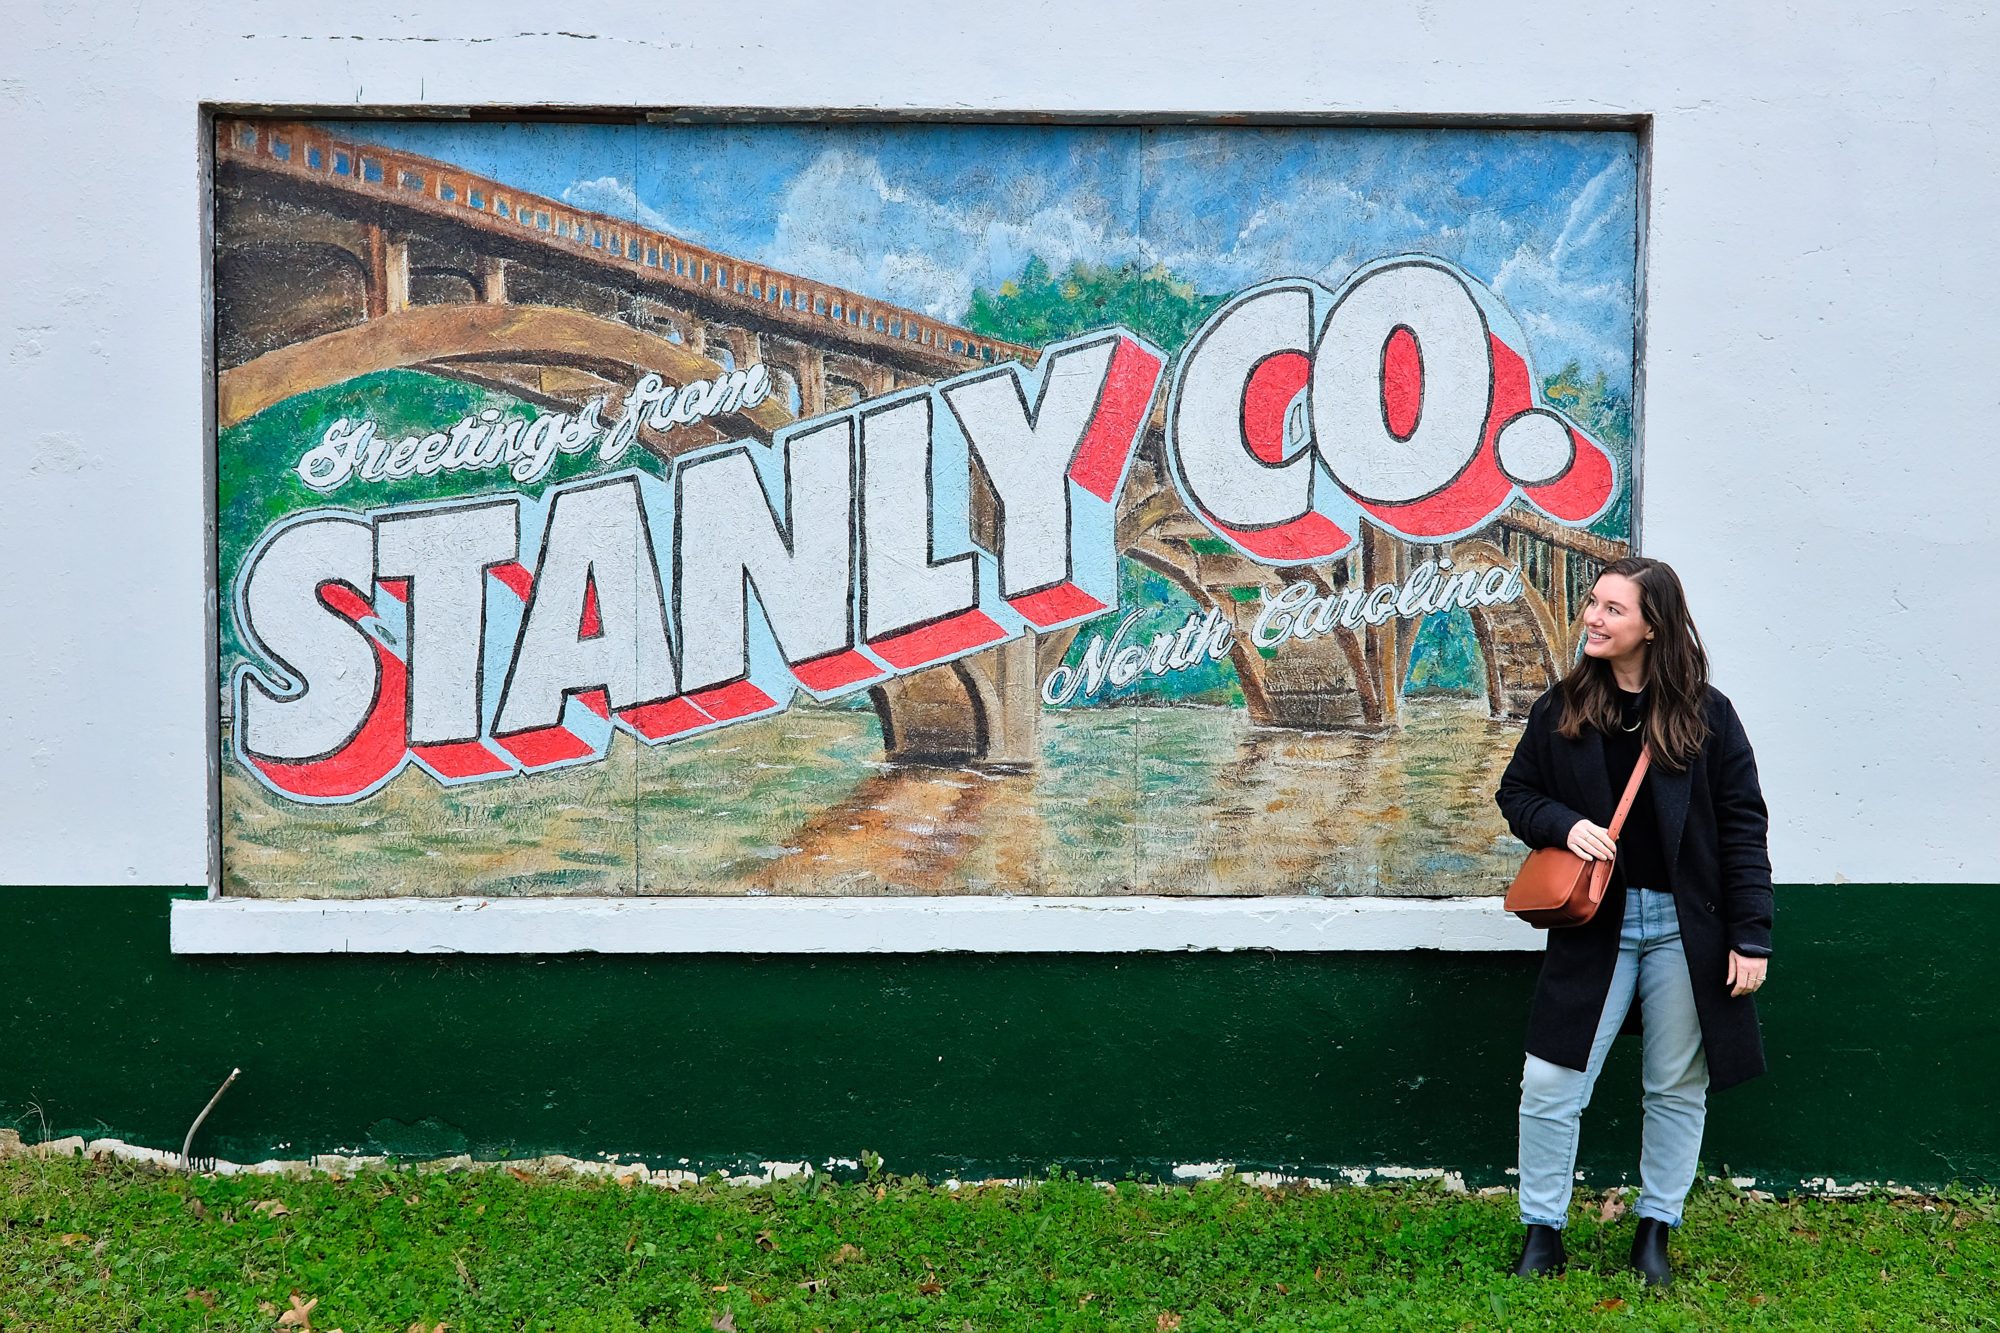 Alyssa stands in front of a mural that reads "Greetings from Stanly County"